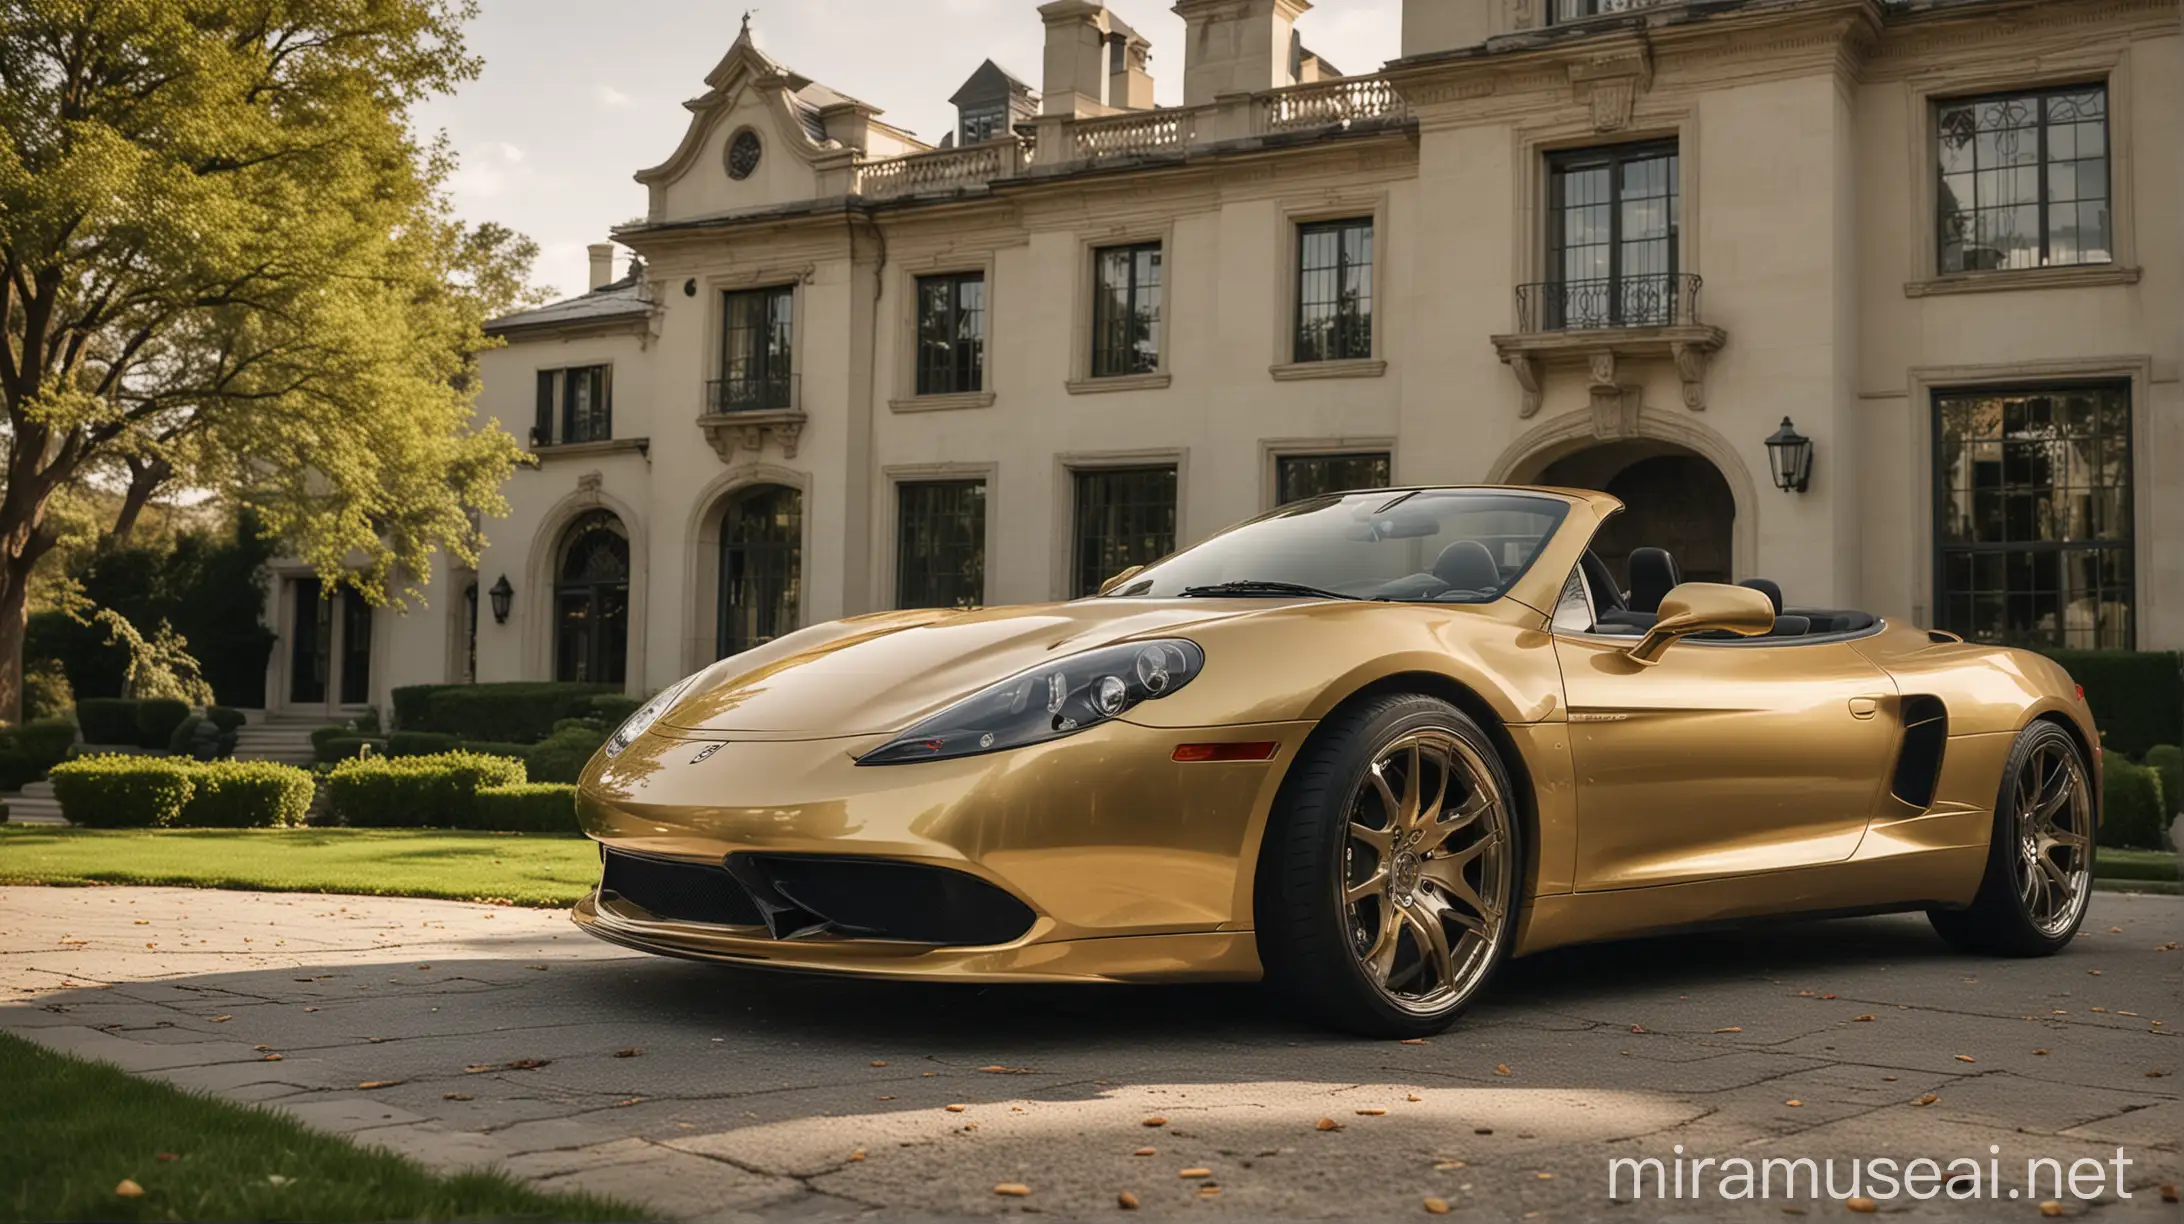 Luxury Gold Sports Car in Front of Grand Modern Mansion